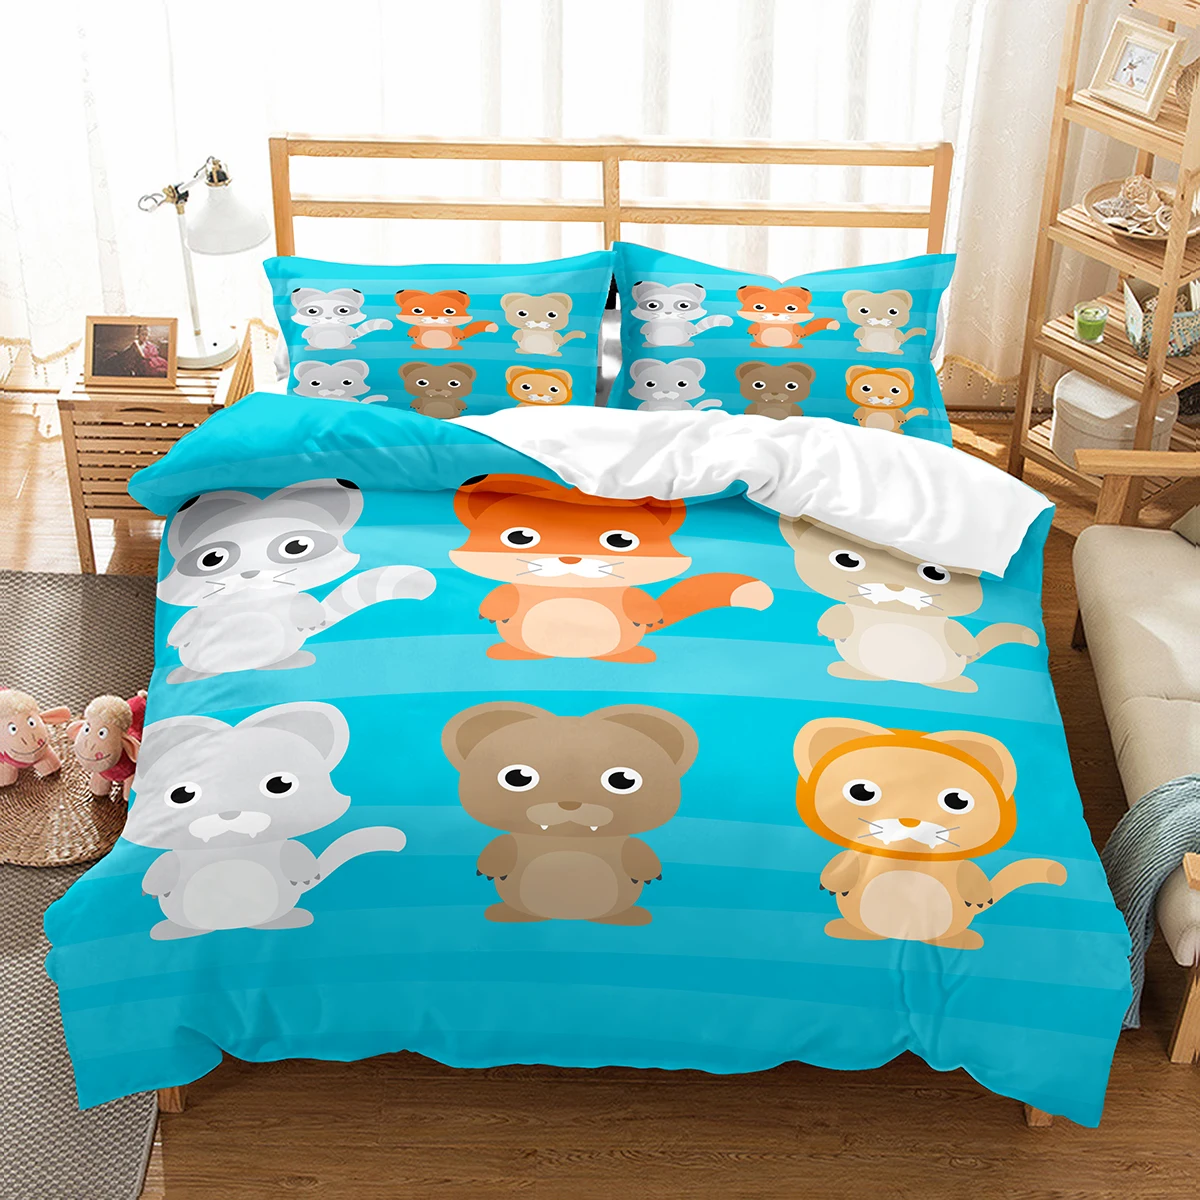 Farm Animals King Queen Duvet Cover Kids Cartoon Cow Bedding Set Deer Wooden House Chick Quilt Cover Polyester Comforter Cover images - 6